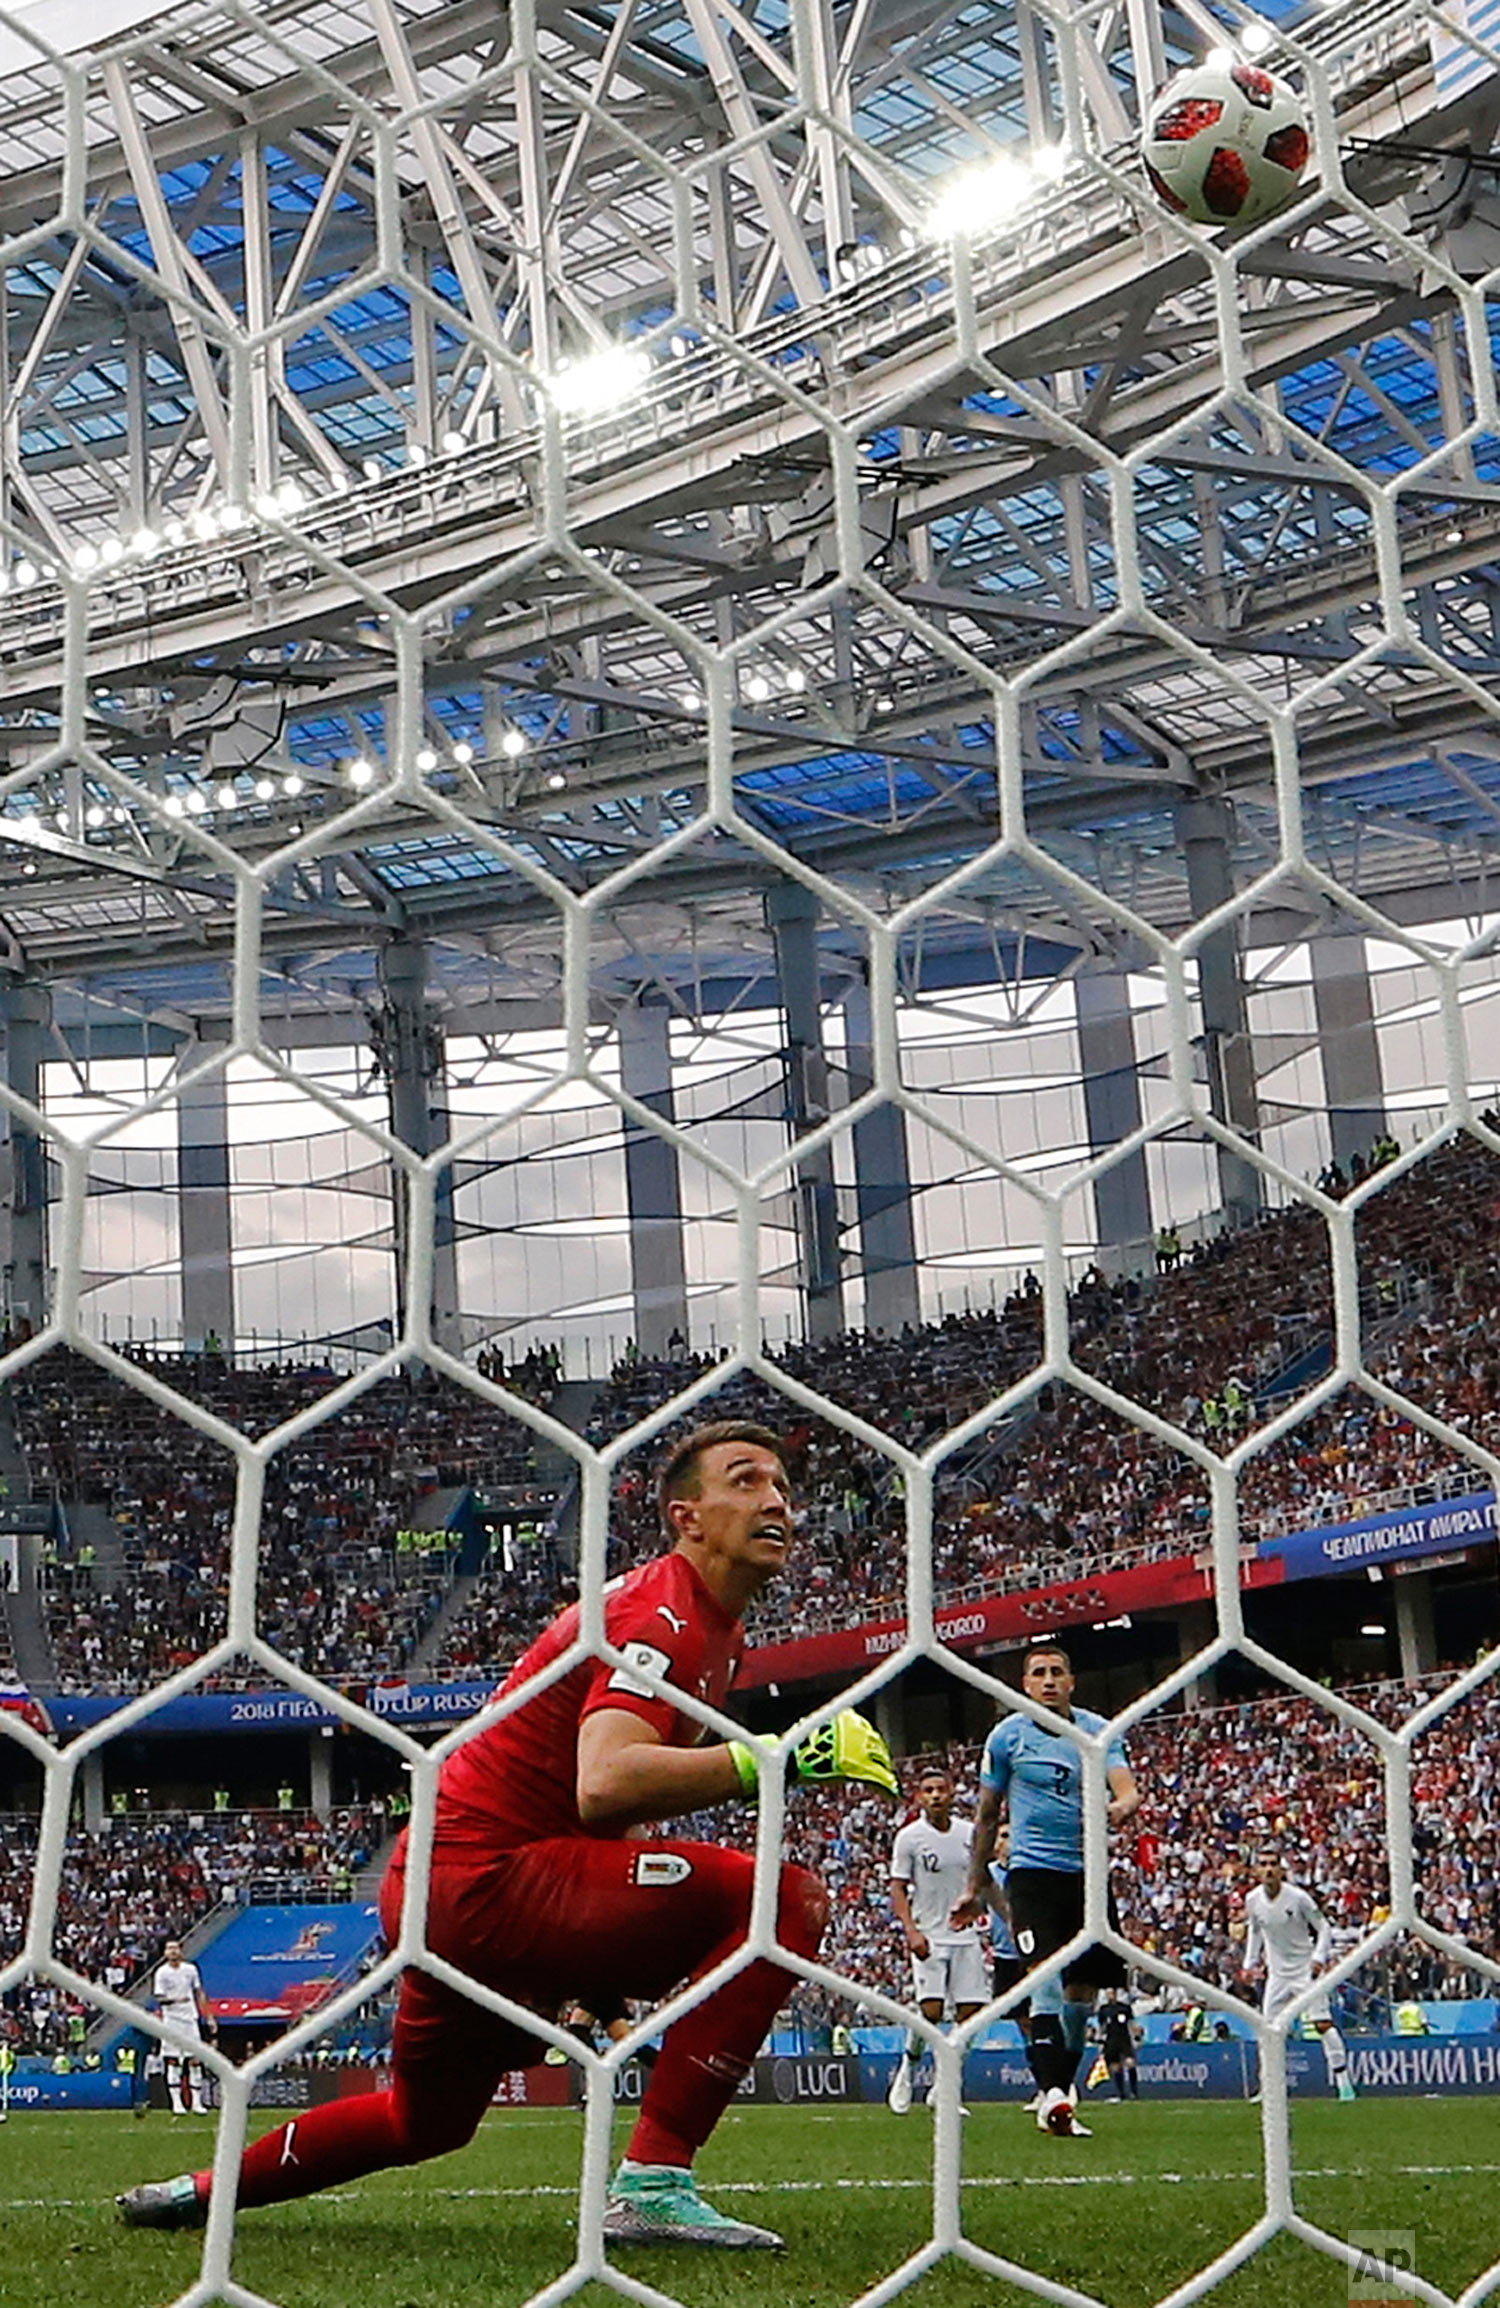  Uruguay goalkeeper Fernando Muslera is beaten by a shot from France's Antoine Griezmann for his side's second goal during the quarterfinal match between Uruguay and France at the 2018 soccer World Cup in the Nizhny Novgorod Stadium, in Nizhny Novgor